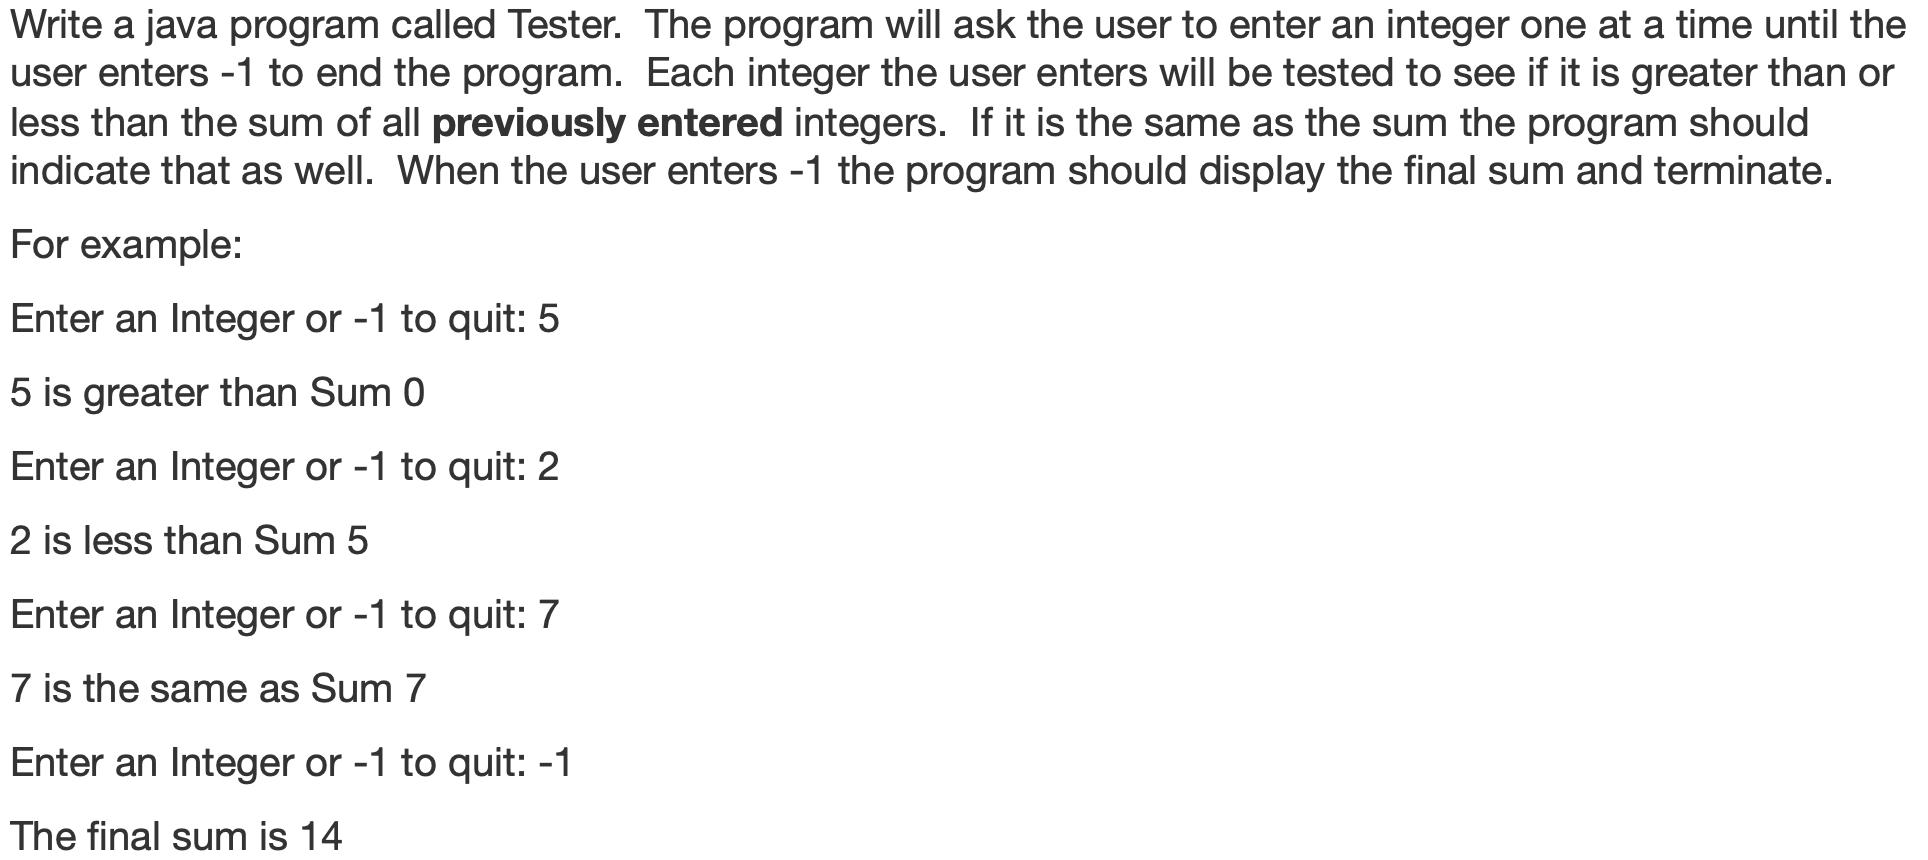 Write a java program called Tester. The program will ask the user to enter an integer one at a time until the